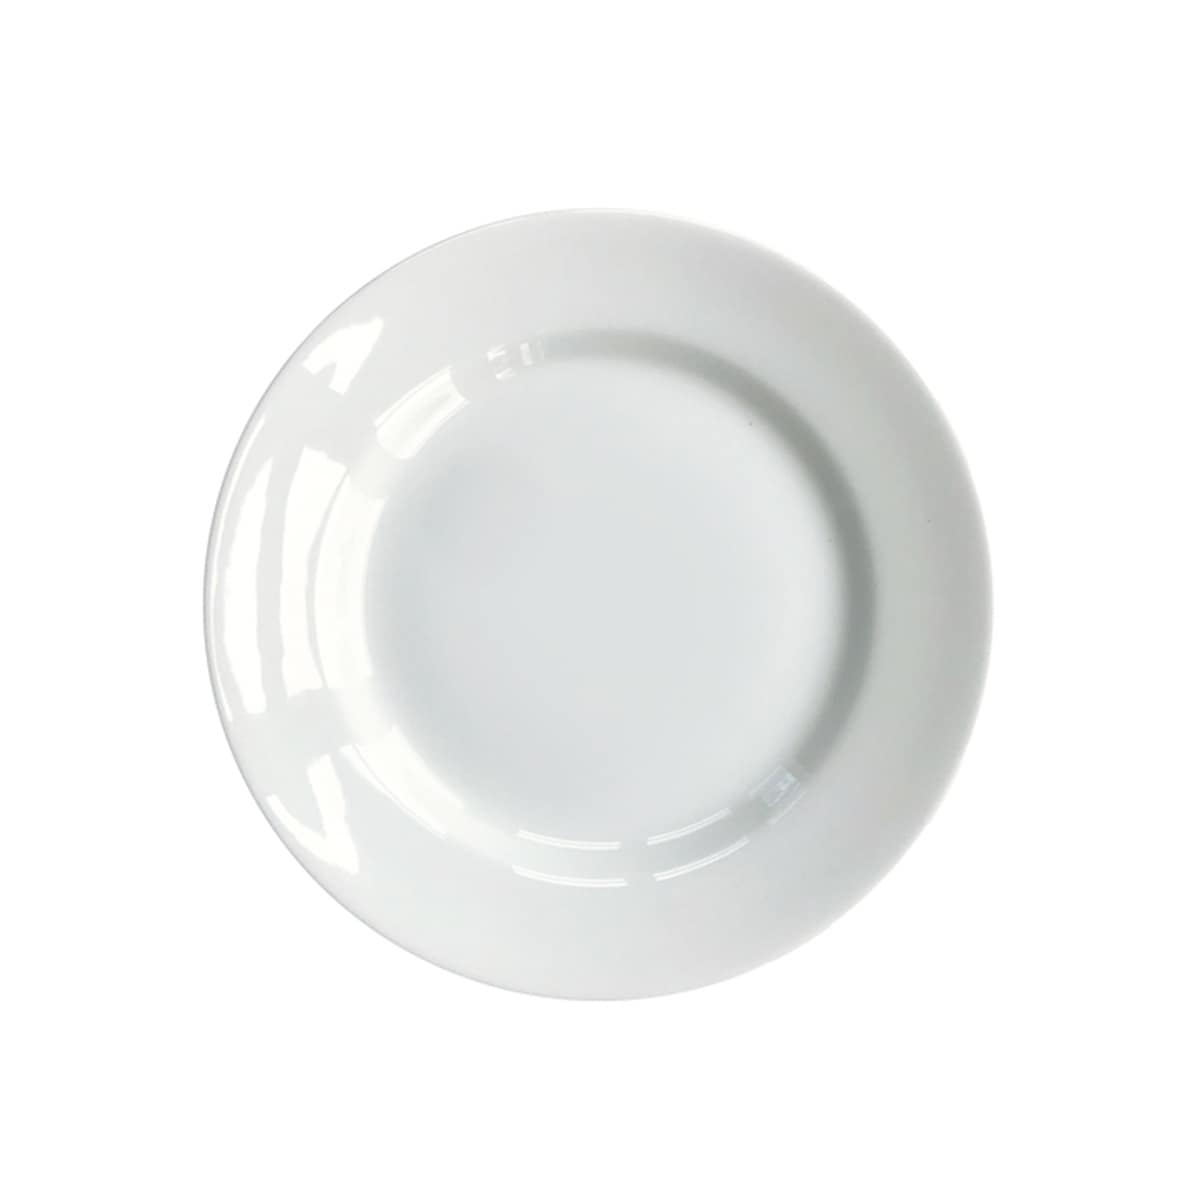 Plate BAS white - 2 pack